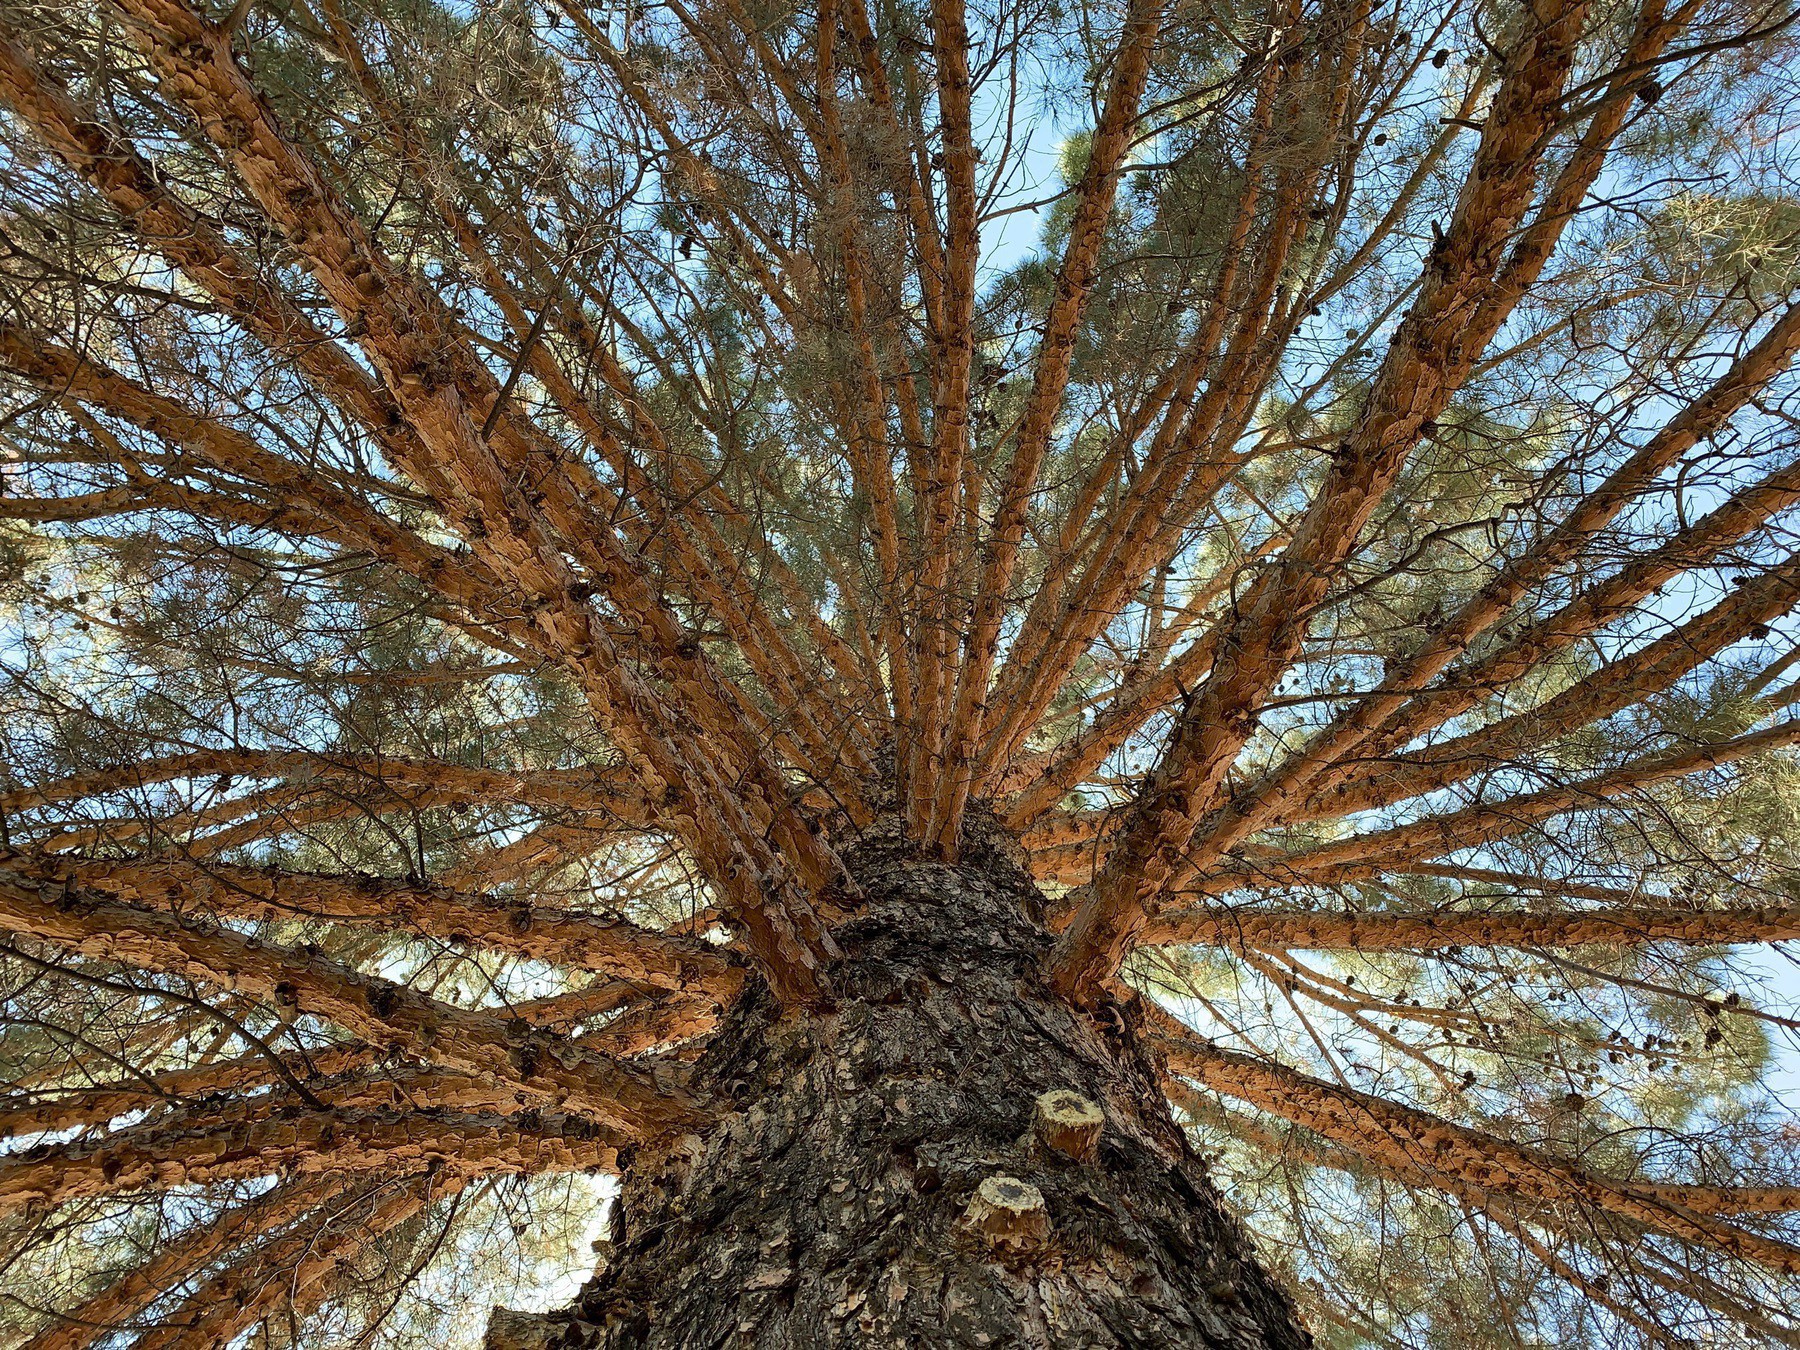 view looking up into a pine tree's branches